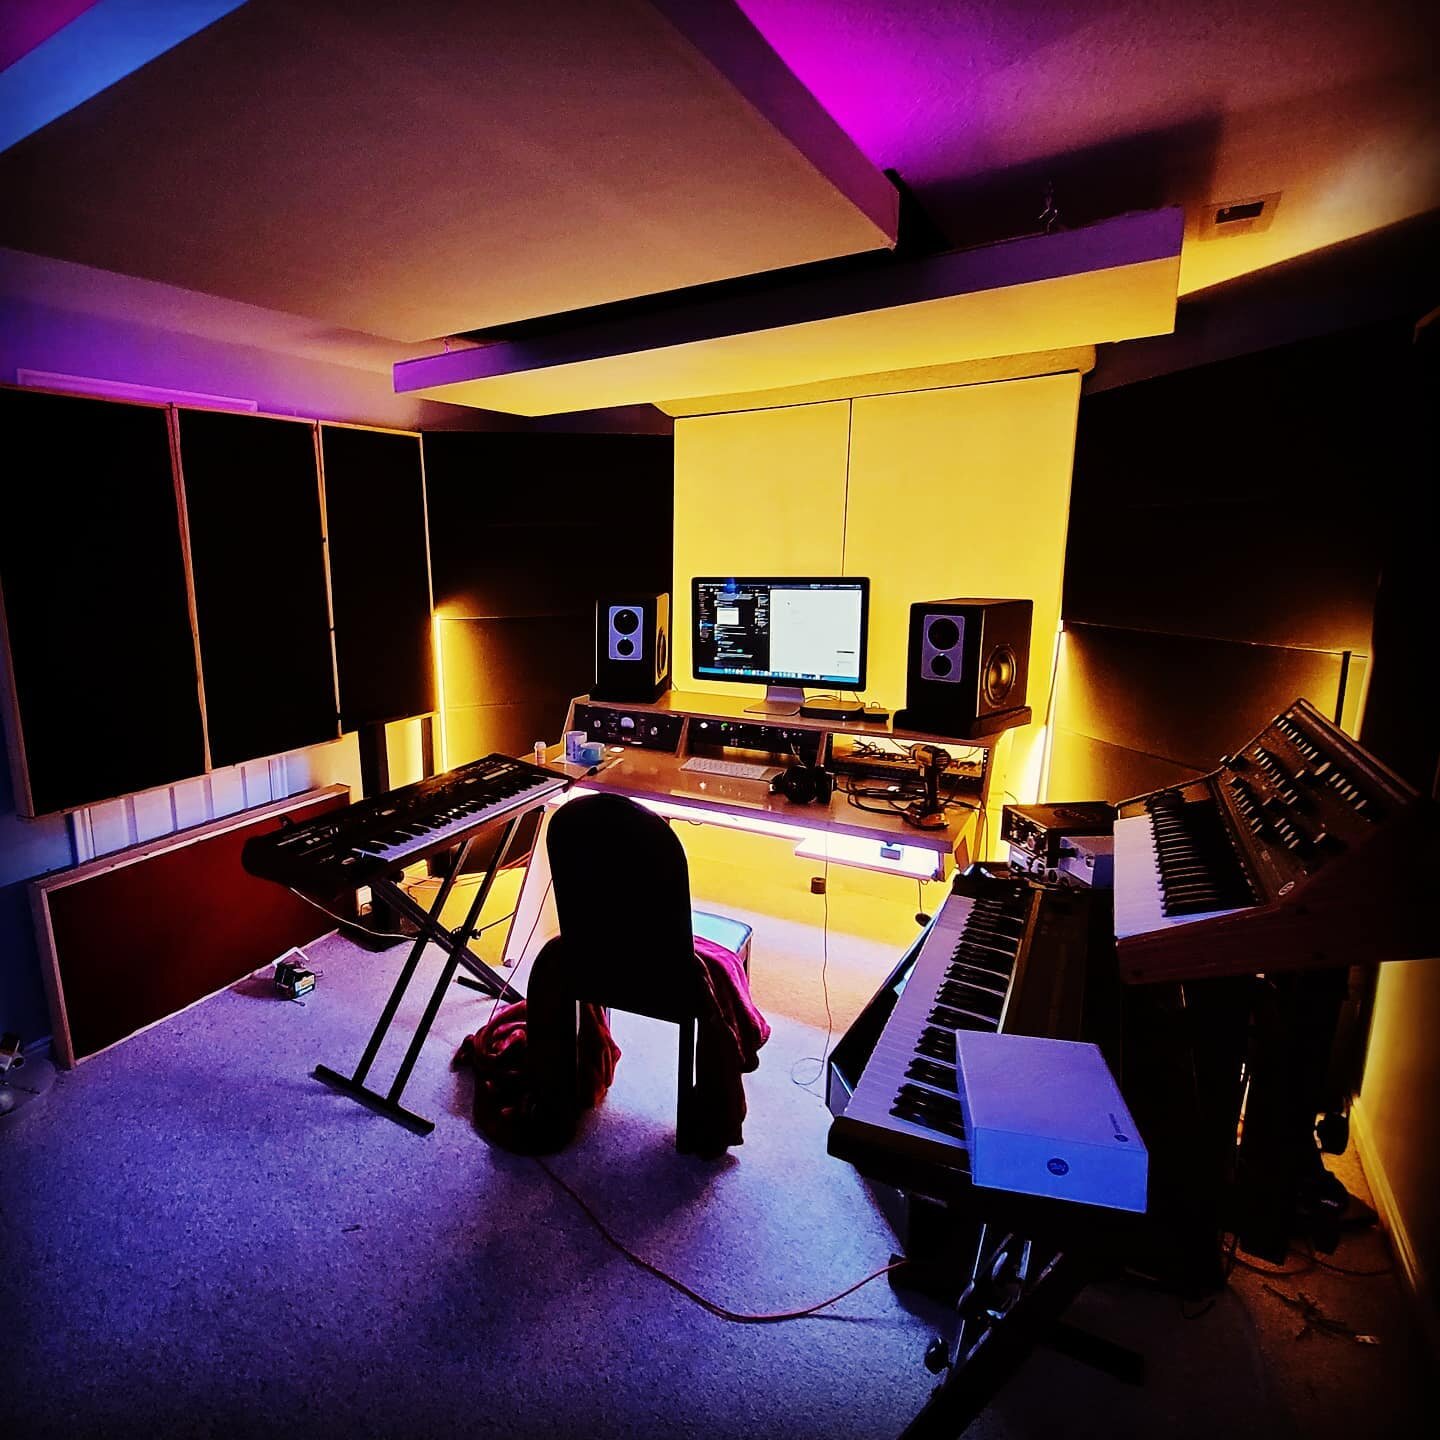 FREE Master. New clients contact us for one totally free no obligations Master. We will show you what Grammy level mastering can do for your songs!

#diystudio #diyproducer #producergodz #producerlife #producergods #musicstudio #masteringengineer #be